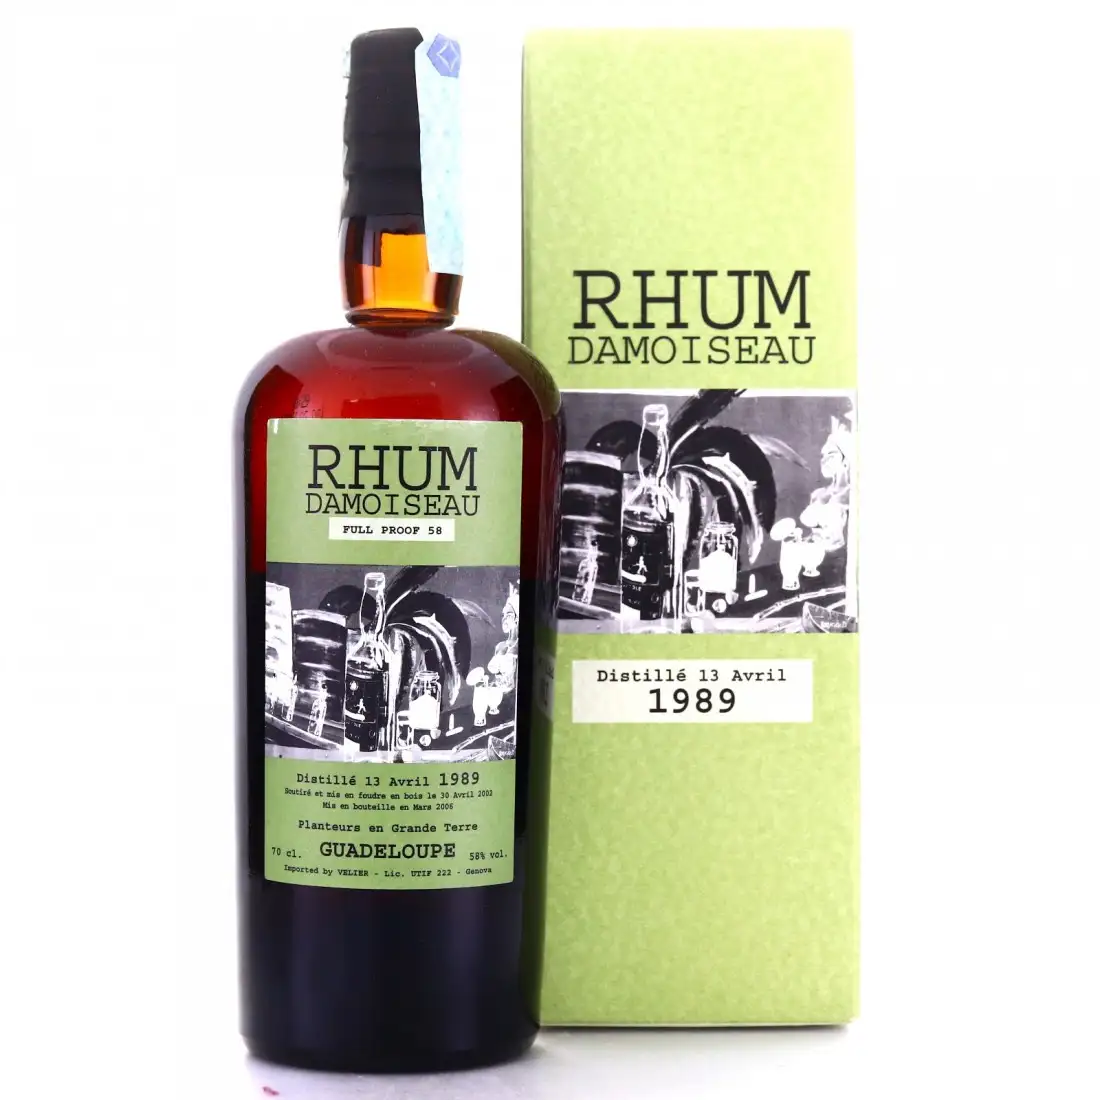 Image of the front of the bottle of the rum 1989